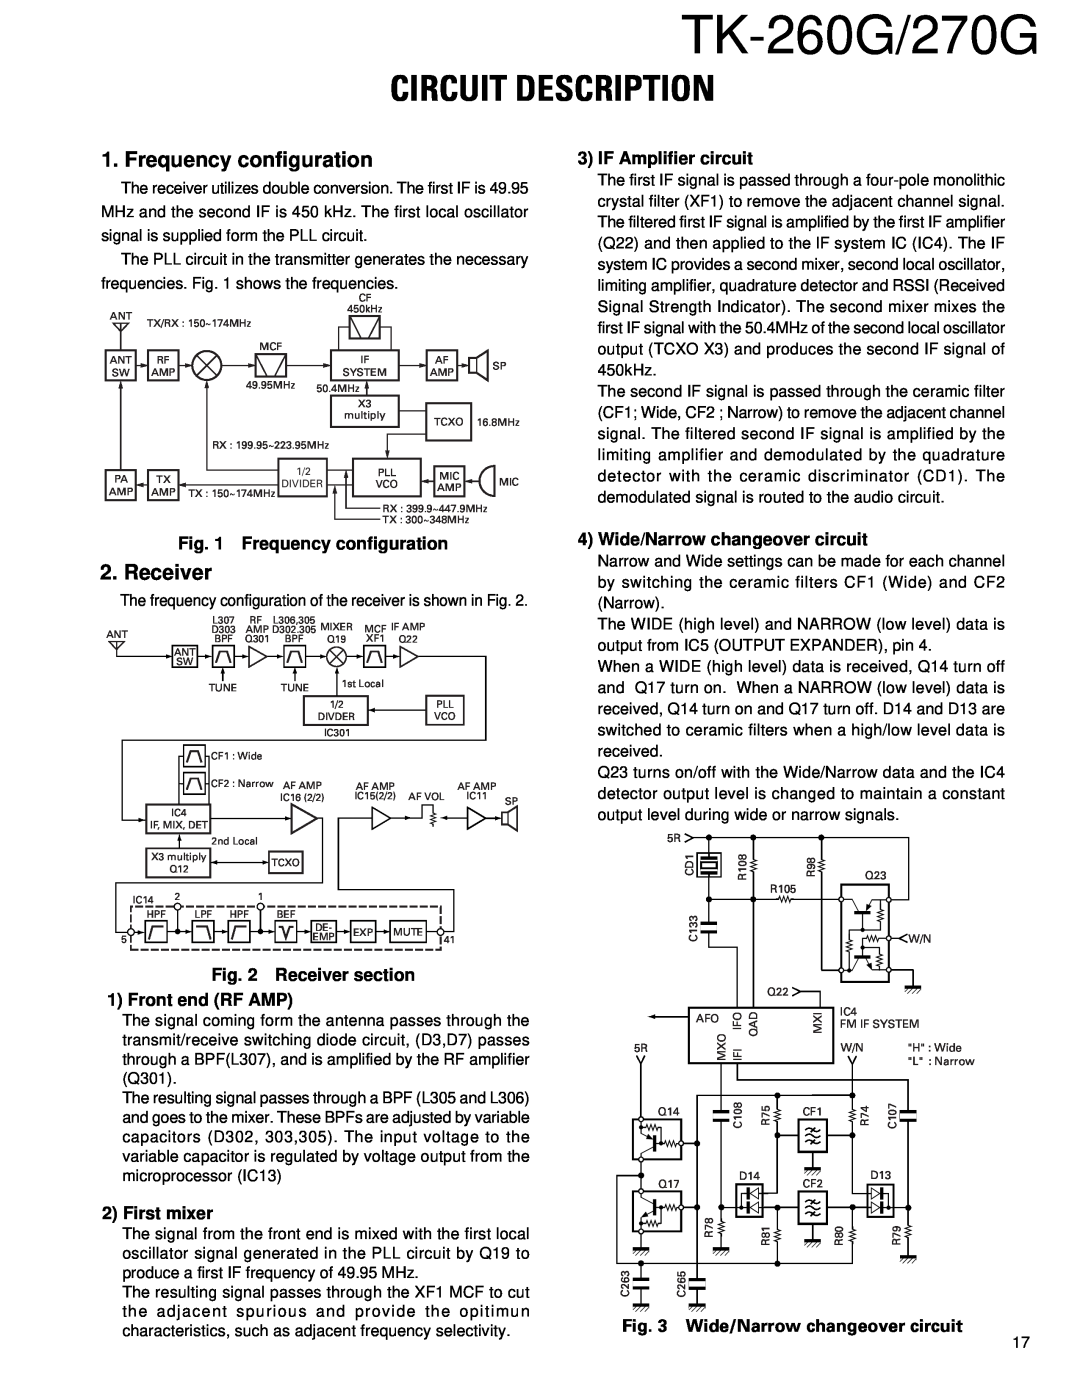 Kenwood TK-260G, TK-270G Circuit Description, Frequency configuration, IF Amplifier circuit, Receiver Front end RF AMP 